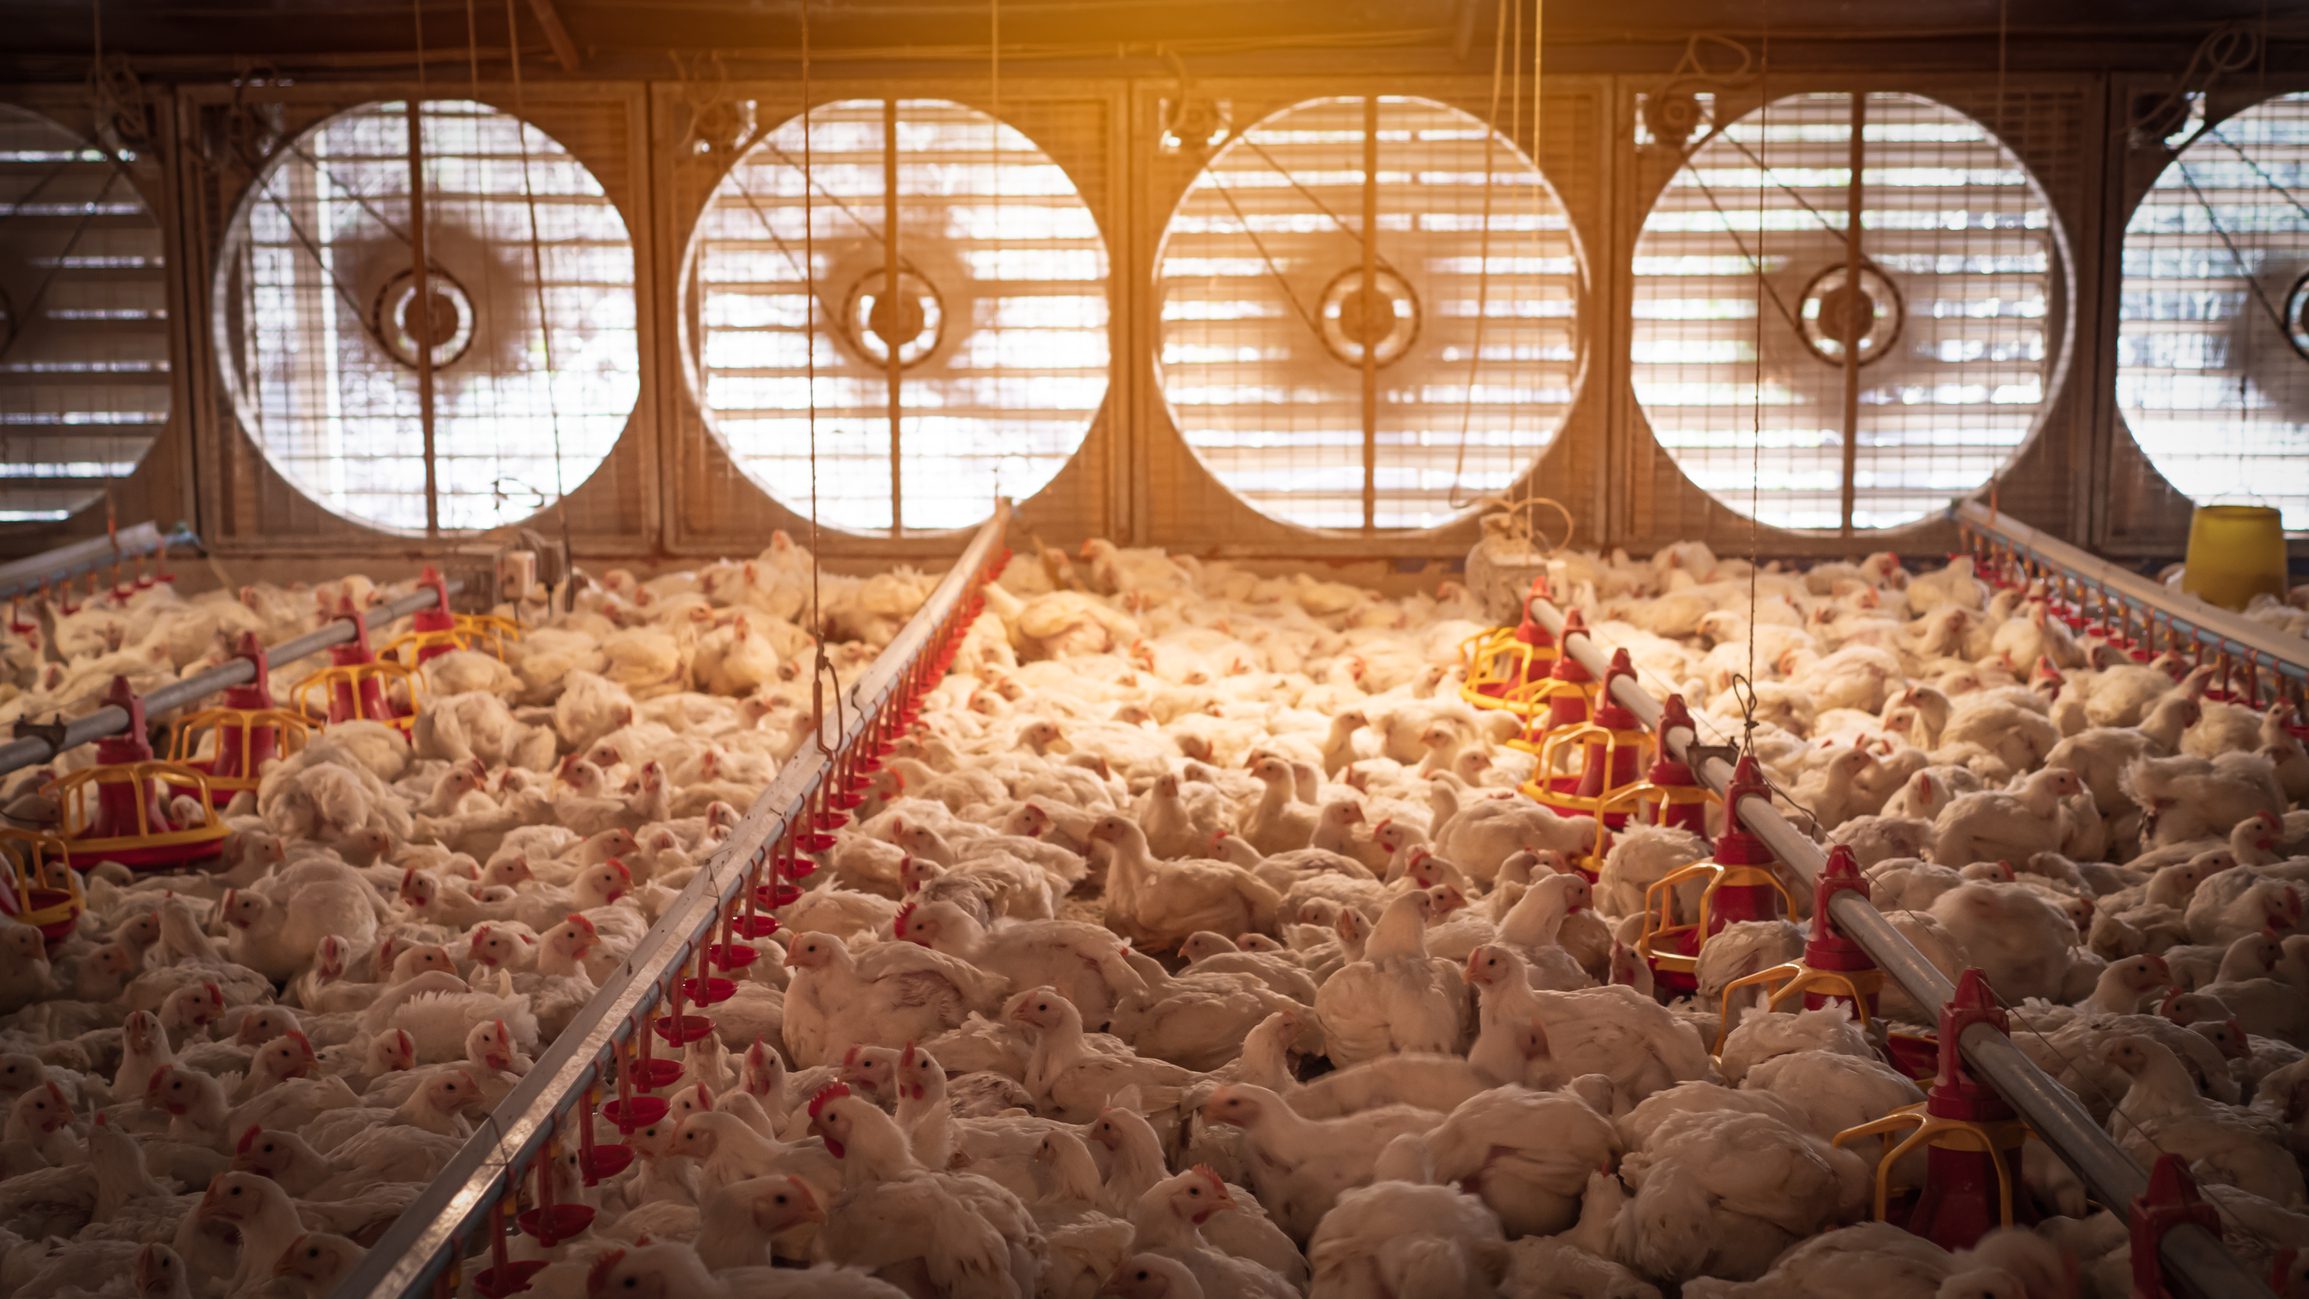 Poultry farming barns with proper ventilation systems